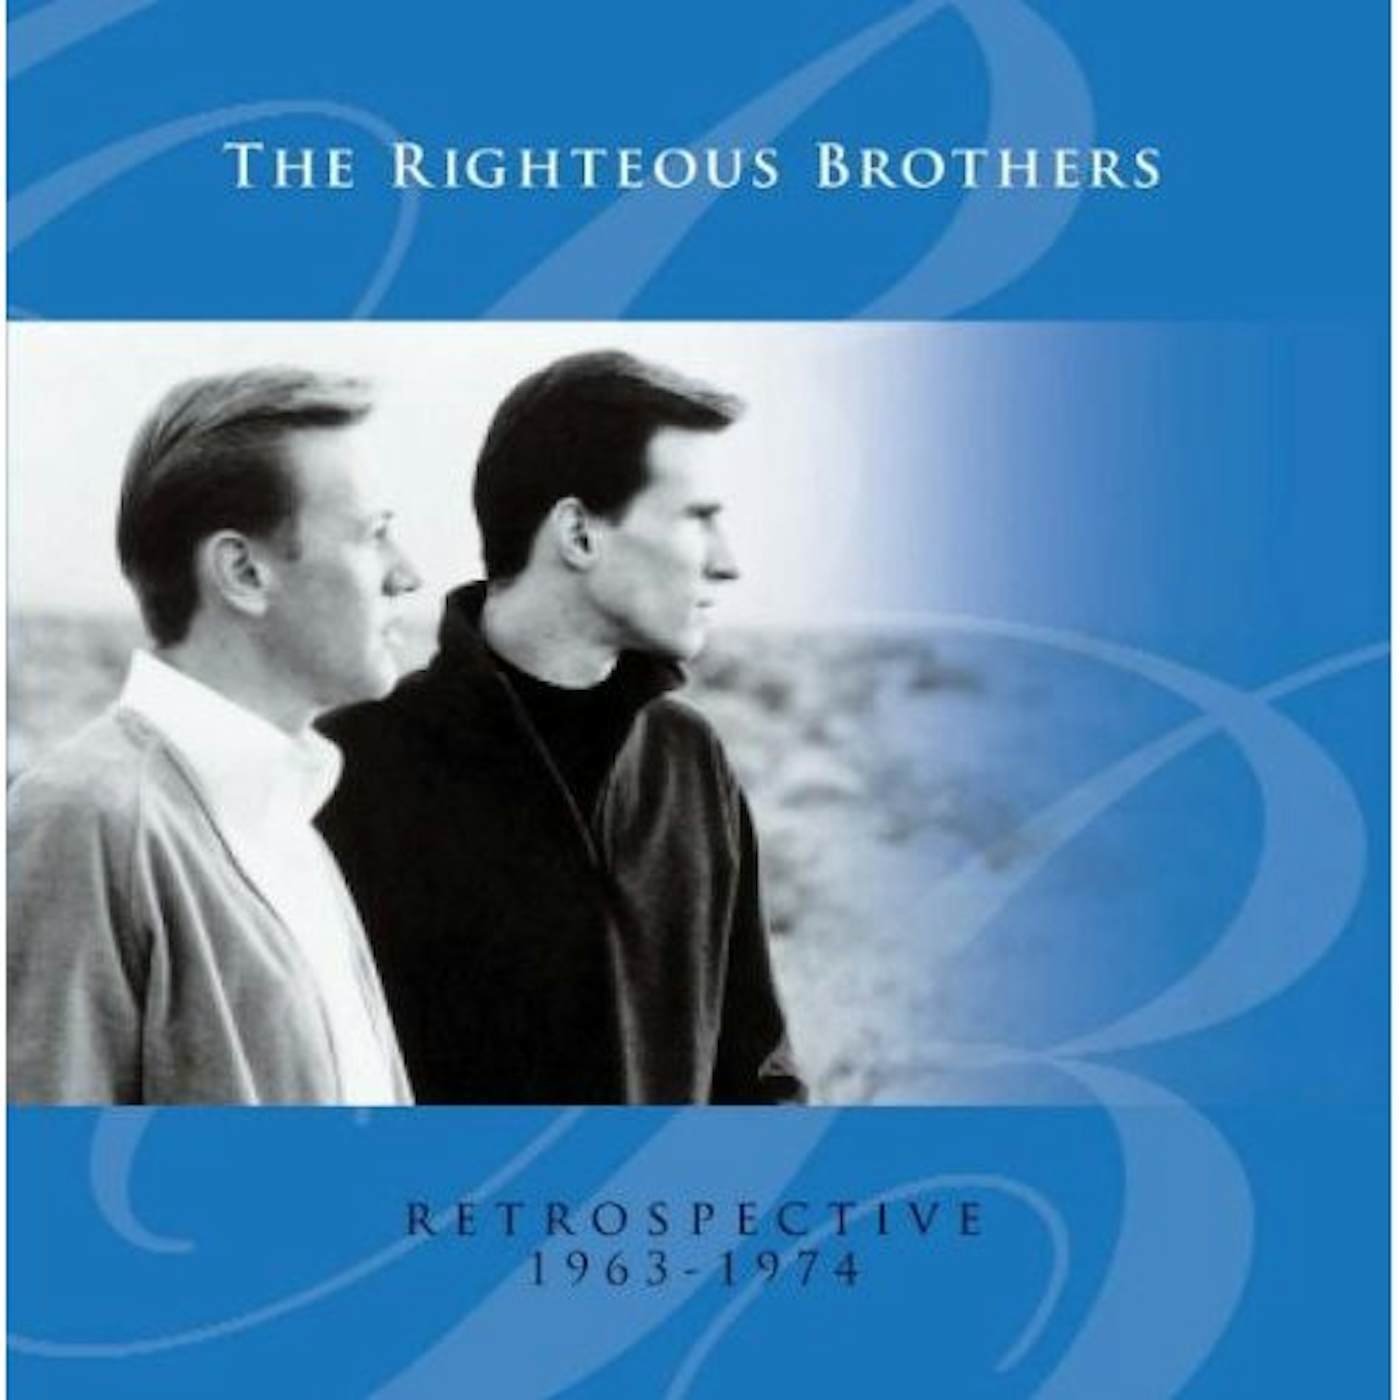 The Righteous Brothers RETROSPECTIVE 1963-1974 CD